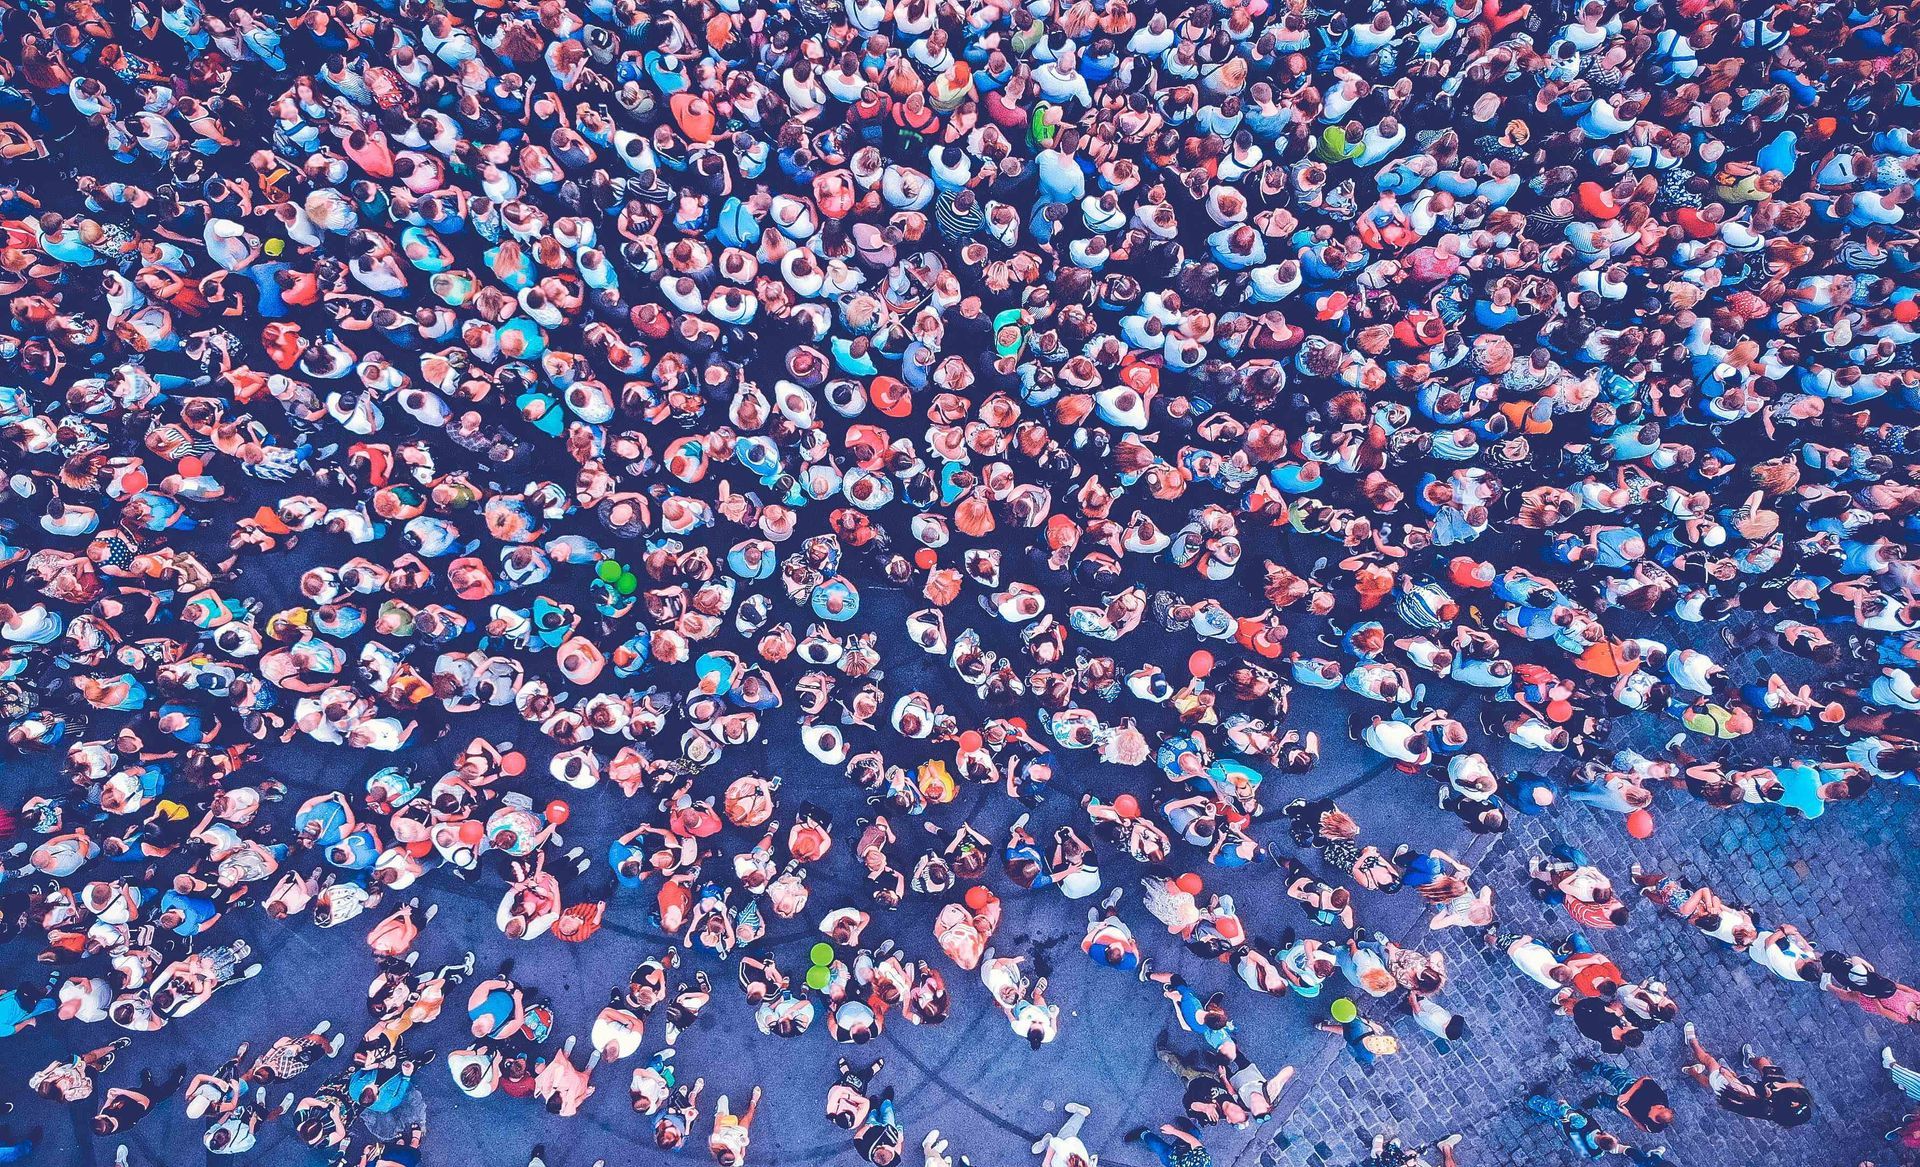 Aerial photography of a lot of people at an event